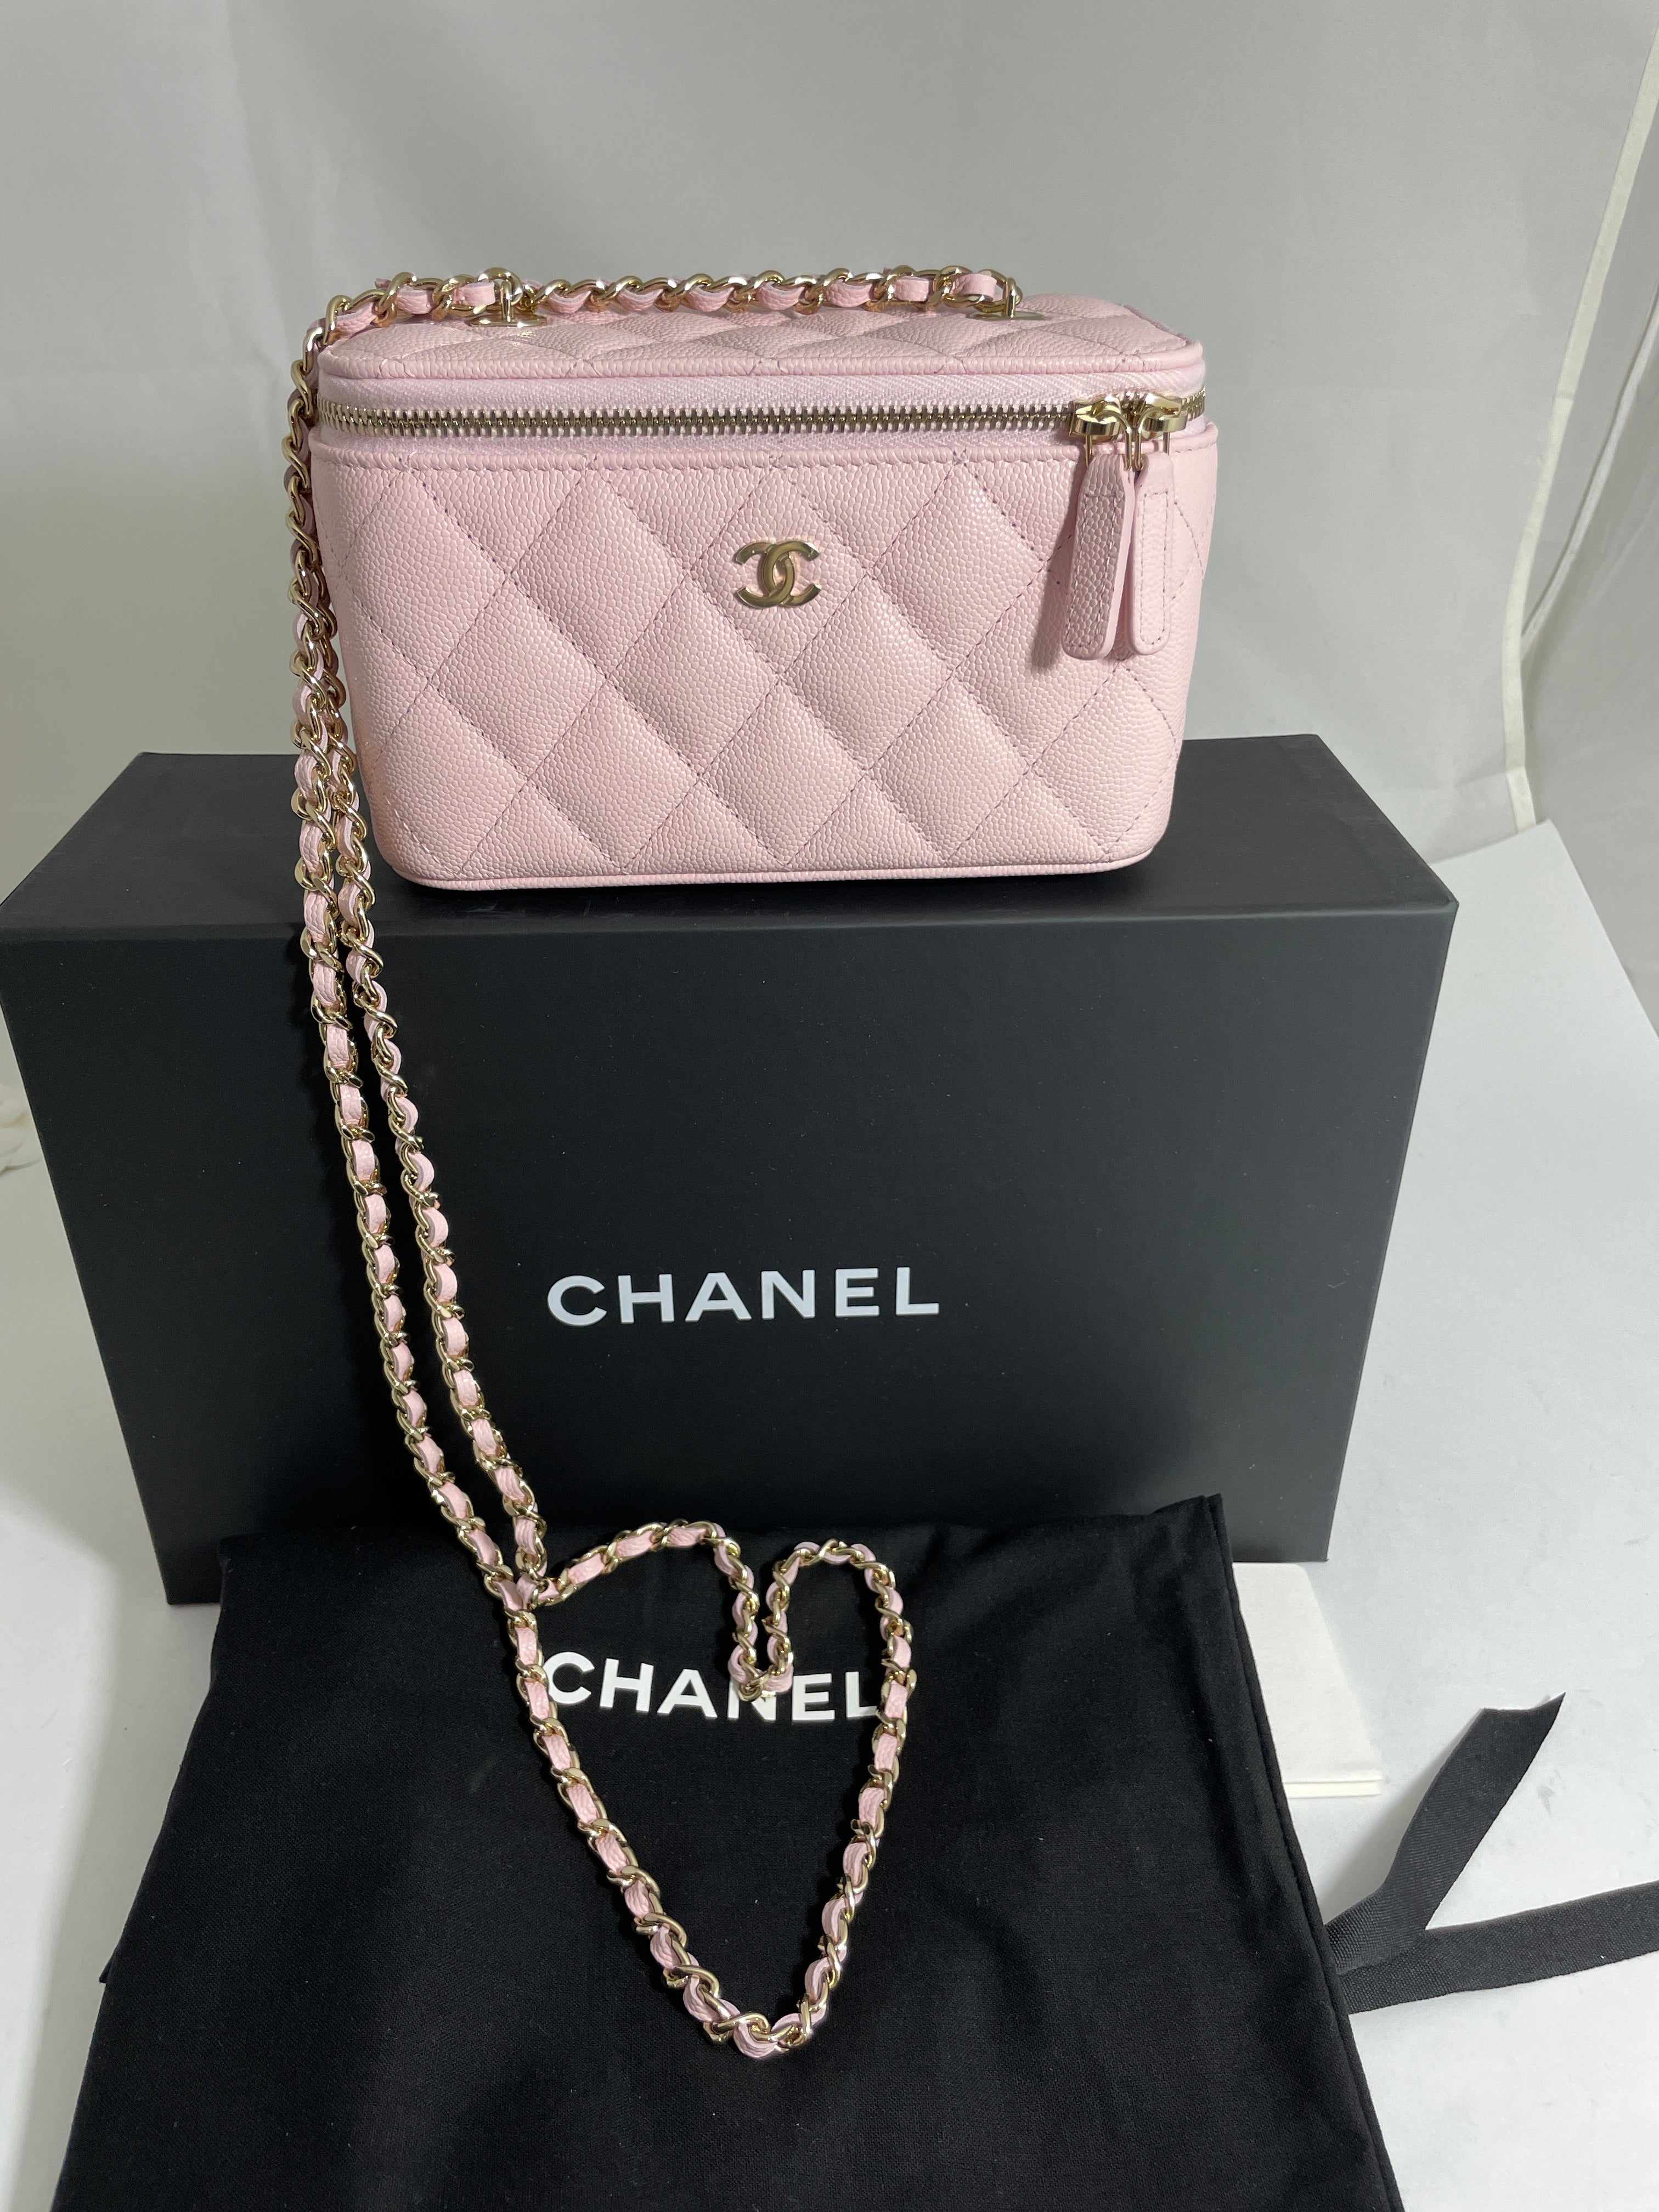 Fashionphile - Travel vibes 🧳✈️ The Chanel Vanity Case features